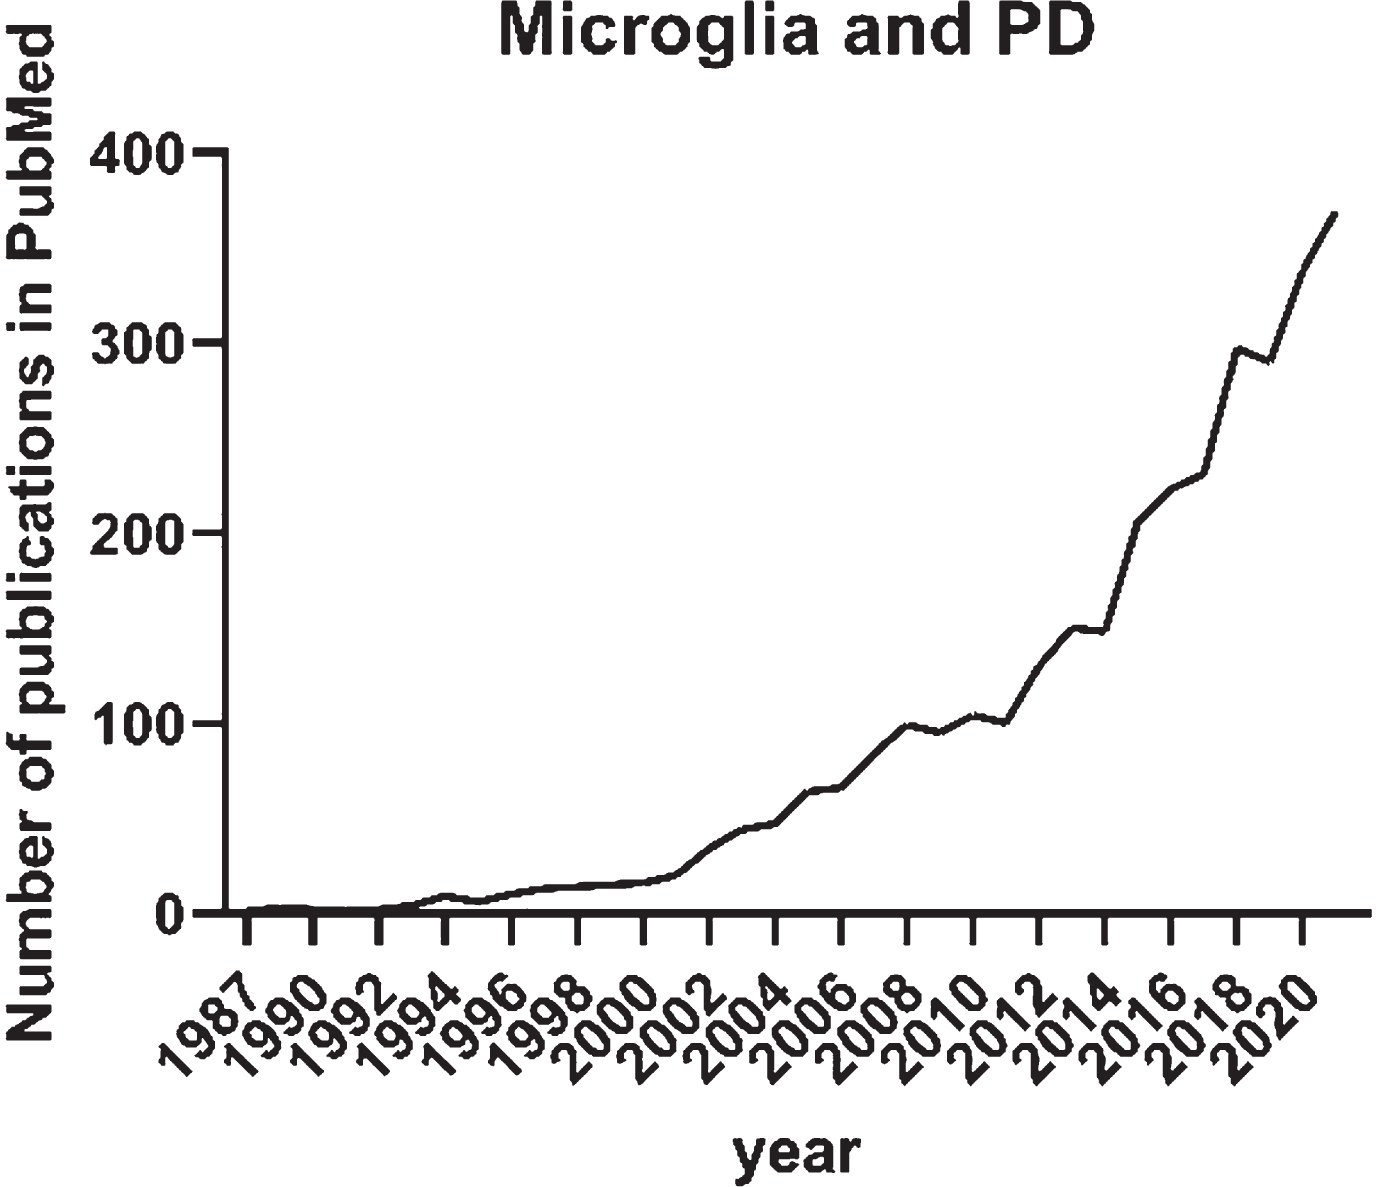 Annual number of publications until the end of 2021 recorded in PubMed and identified with the search “Microglia” and “Parkinson’s disease”.